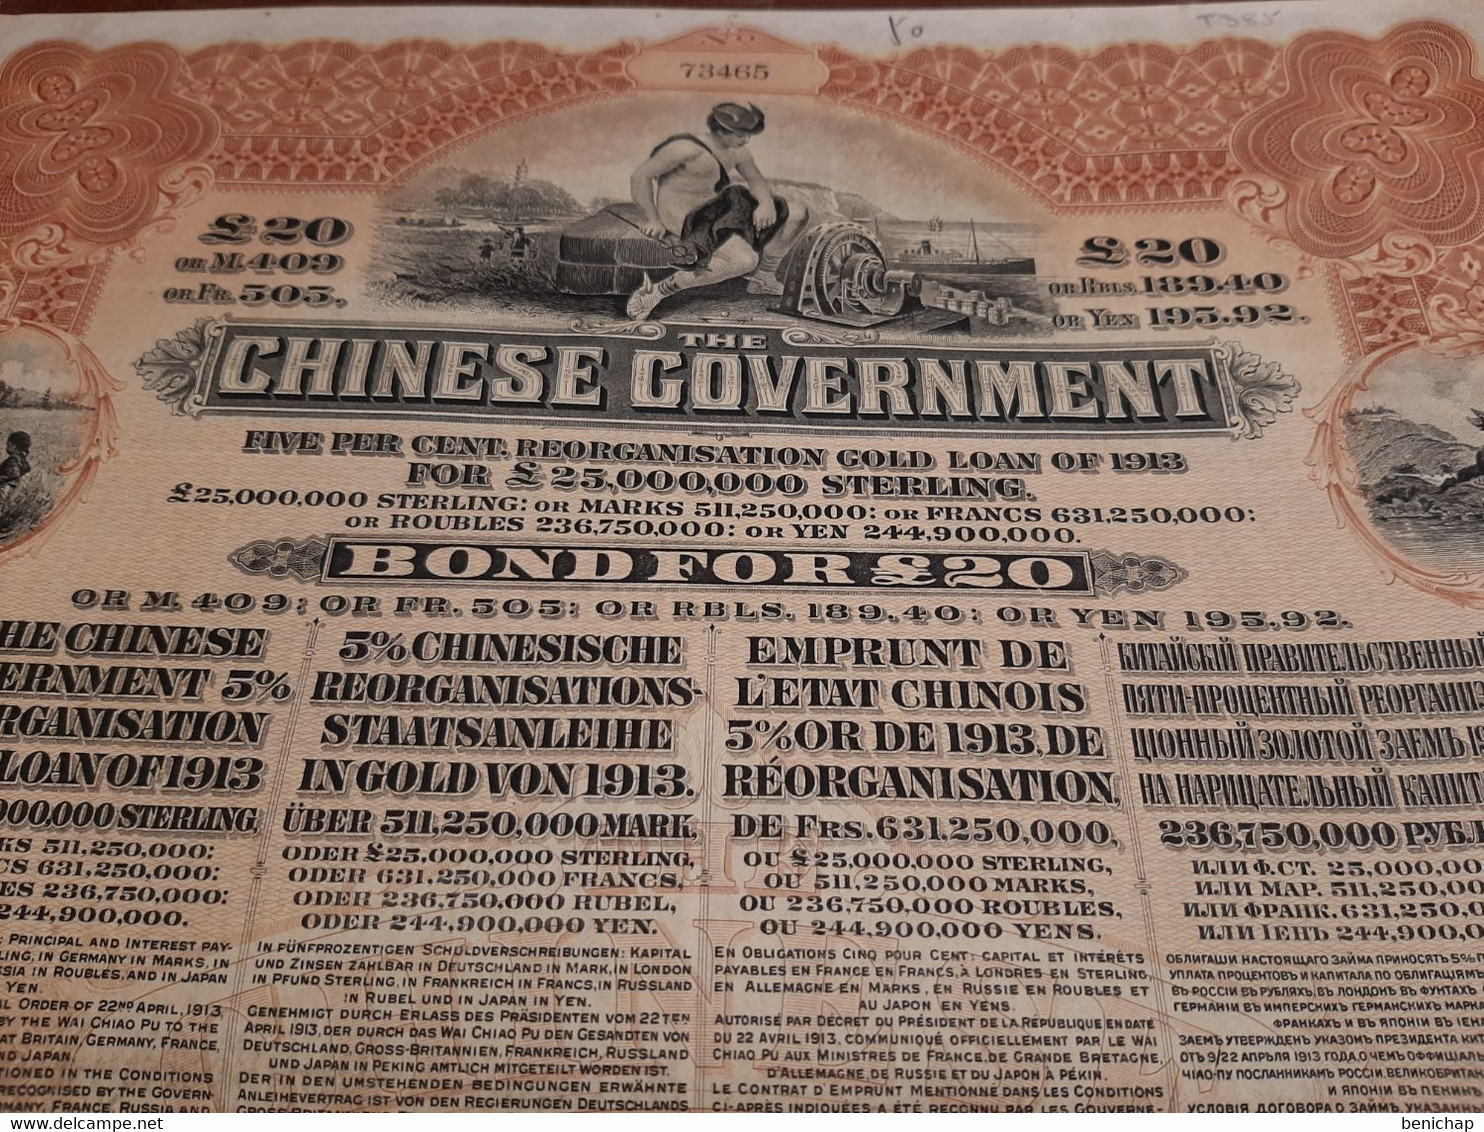 1913 - Chine - China - Chinese-Chinese Government Emprunt De L'Etat Chinois 5% - Hong Kong & Shanghai Banking In London. - Asie